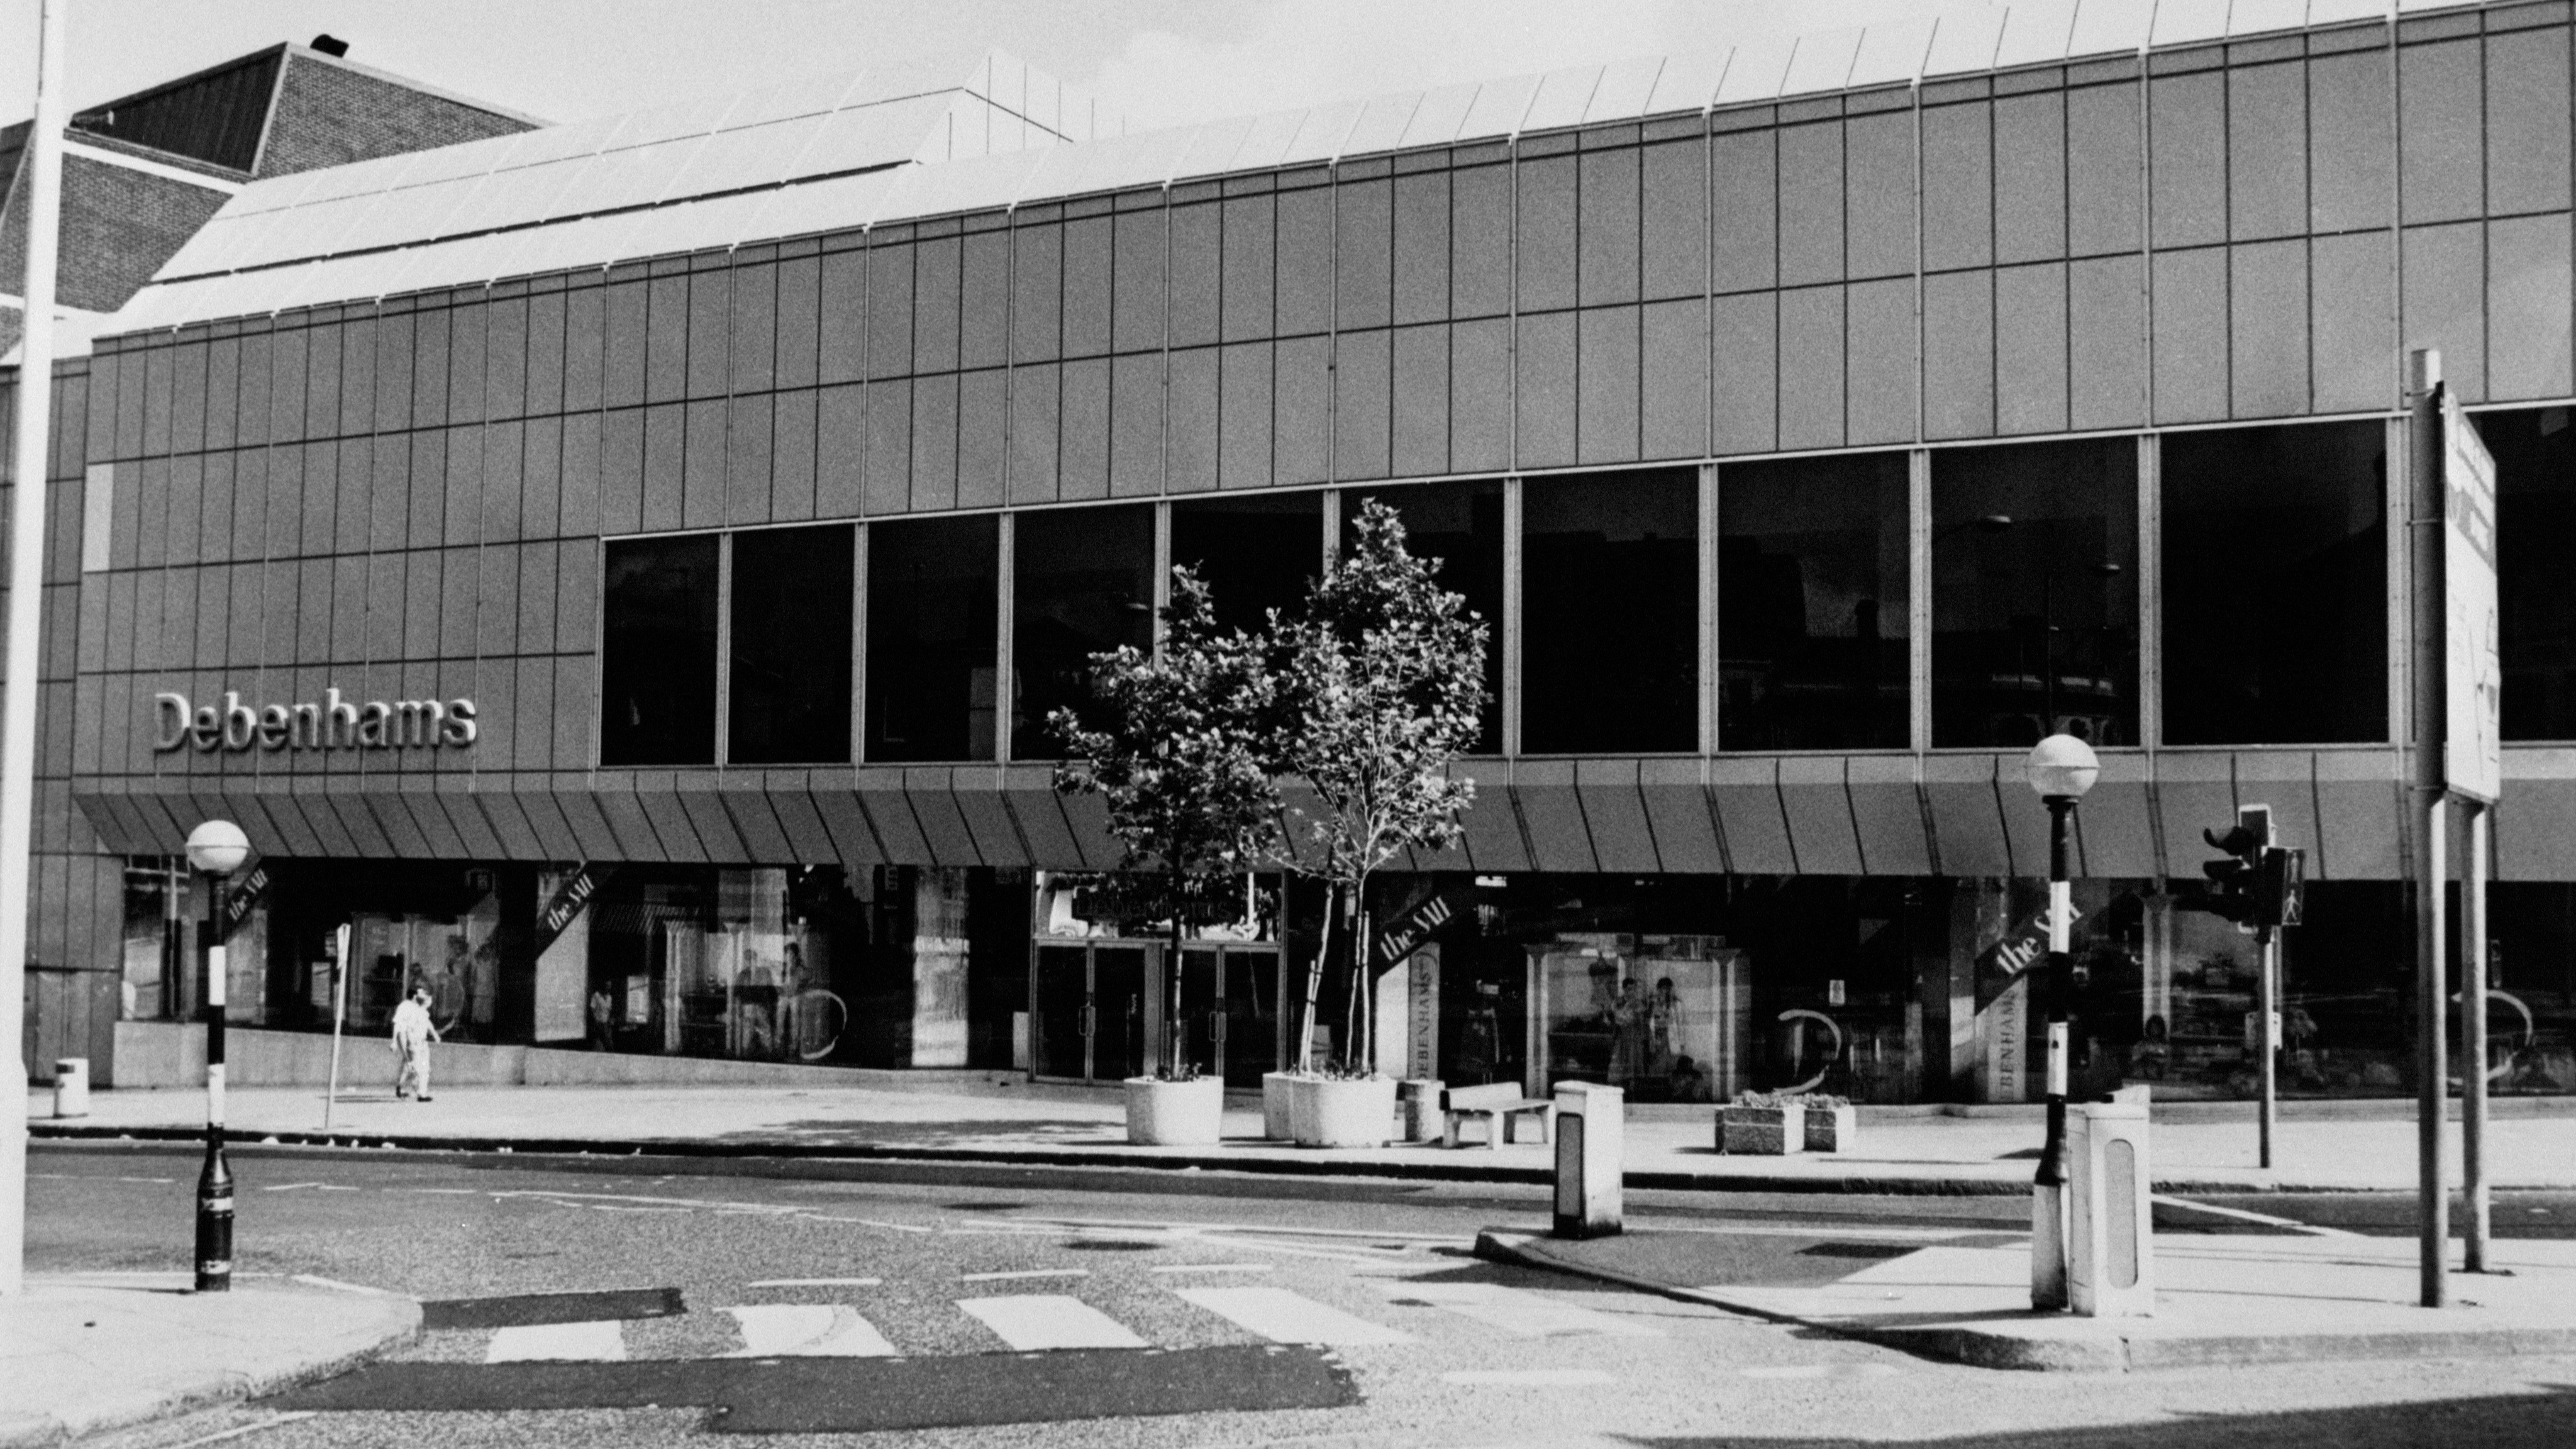 Debenhams: The famous store's 242-year rise and fall